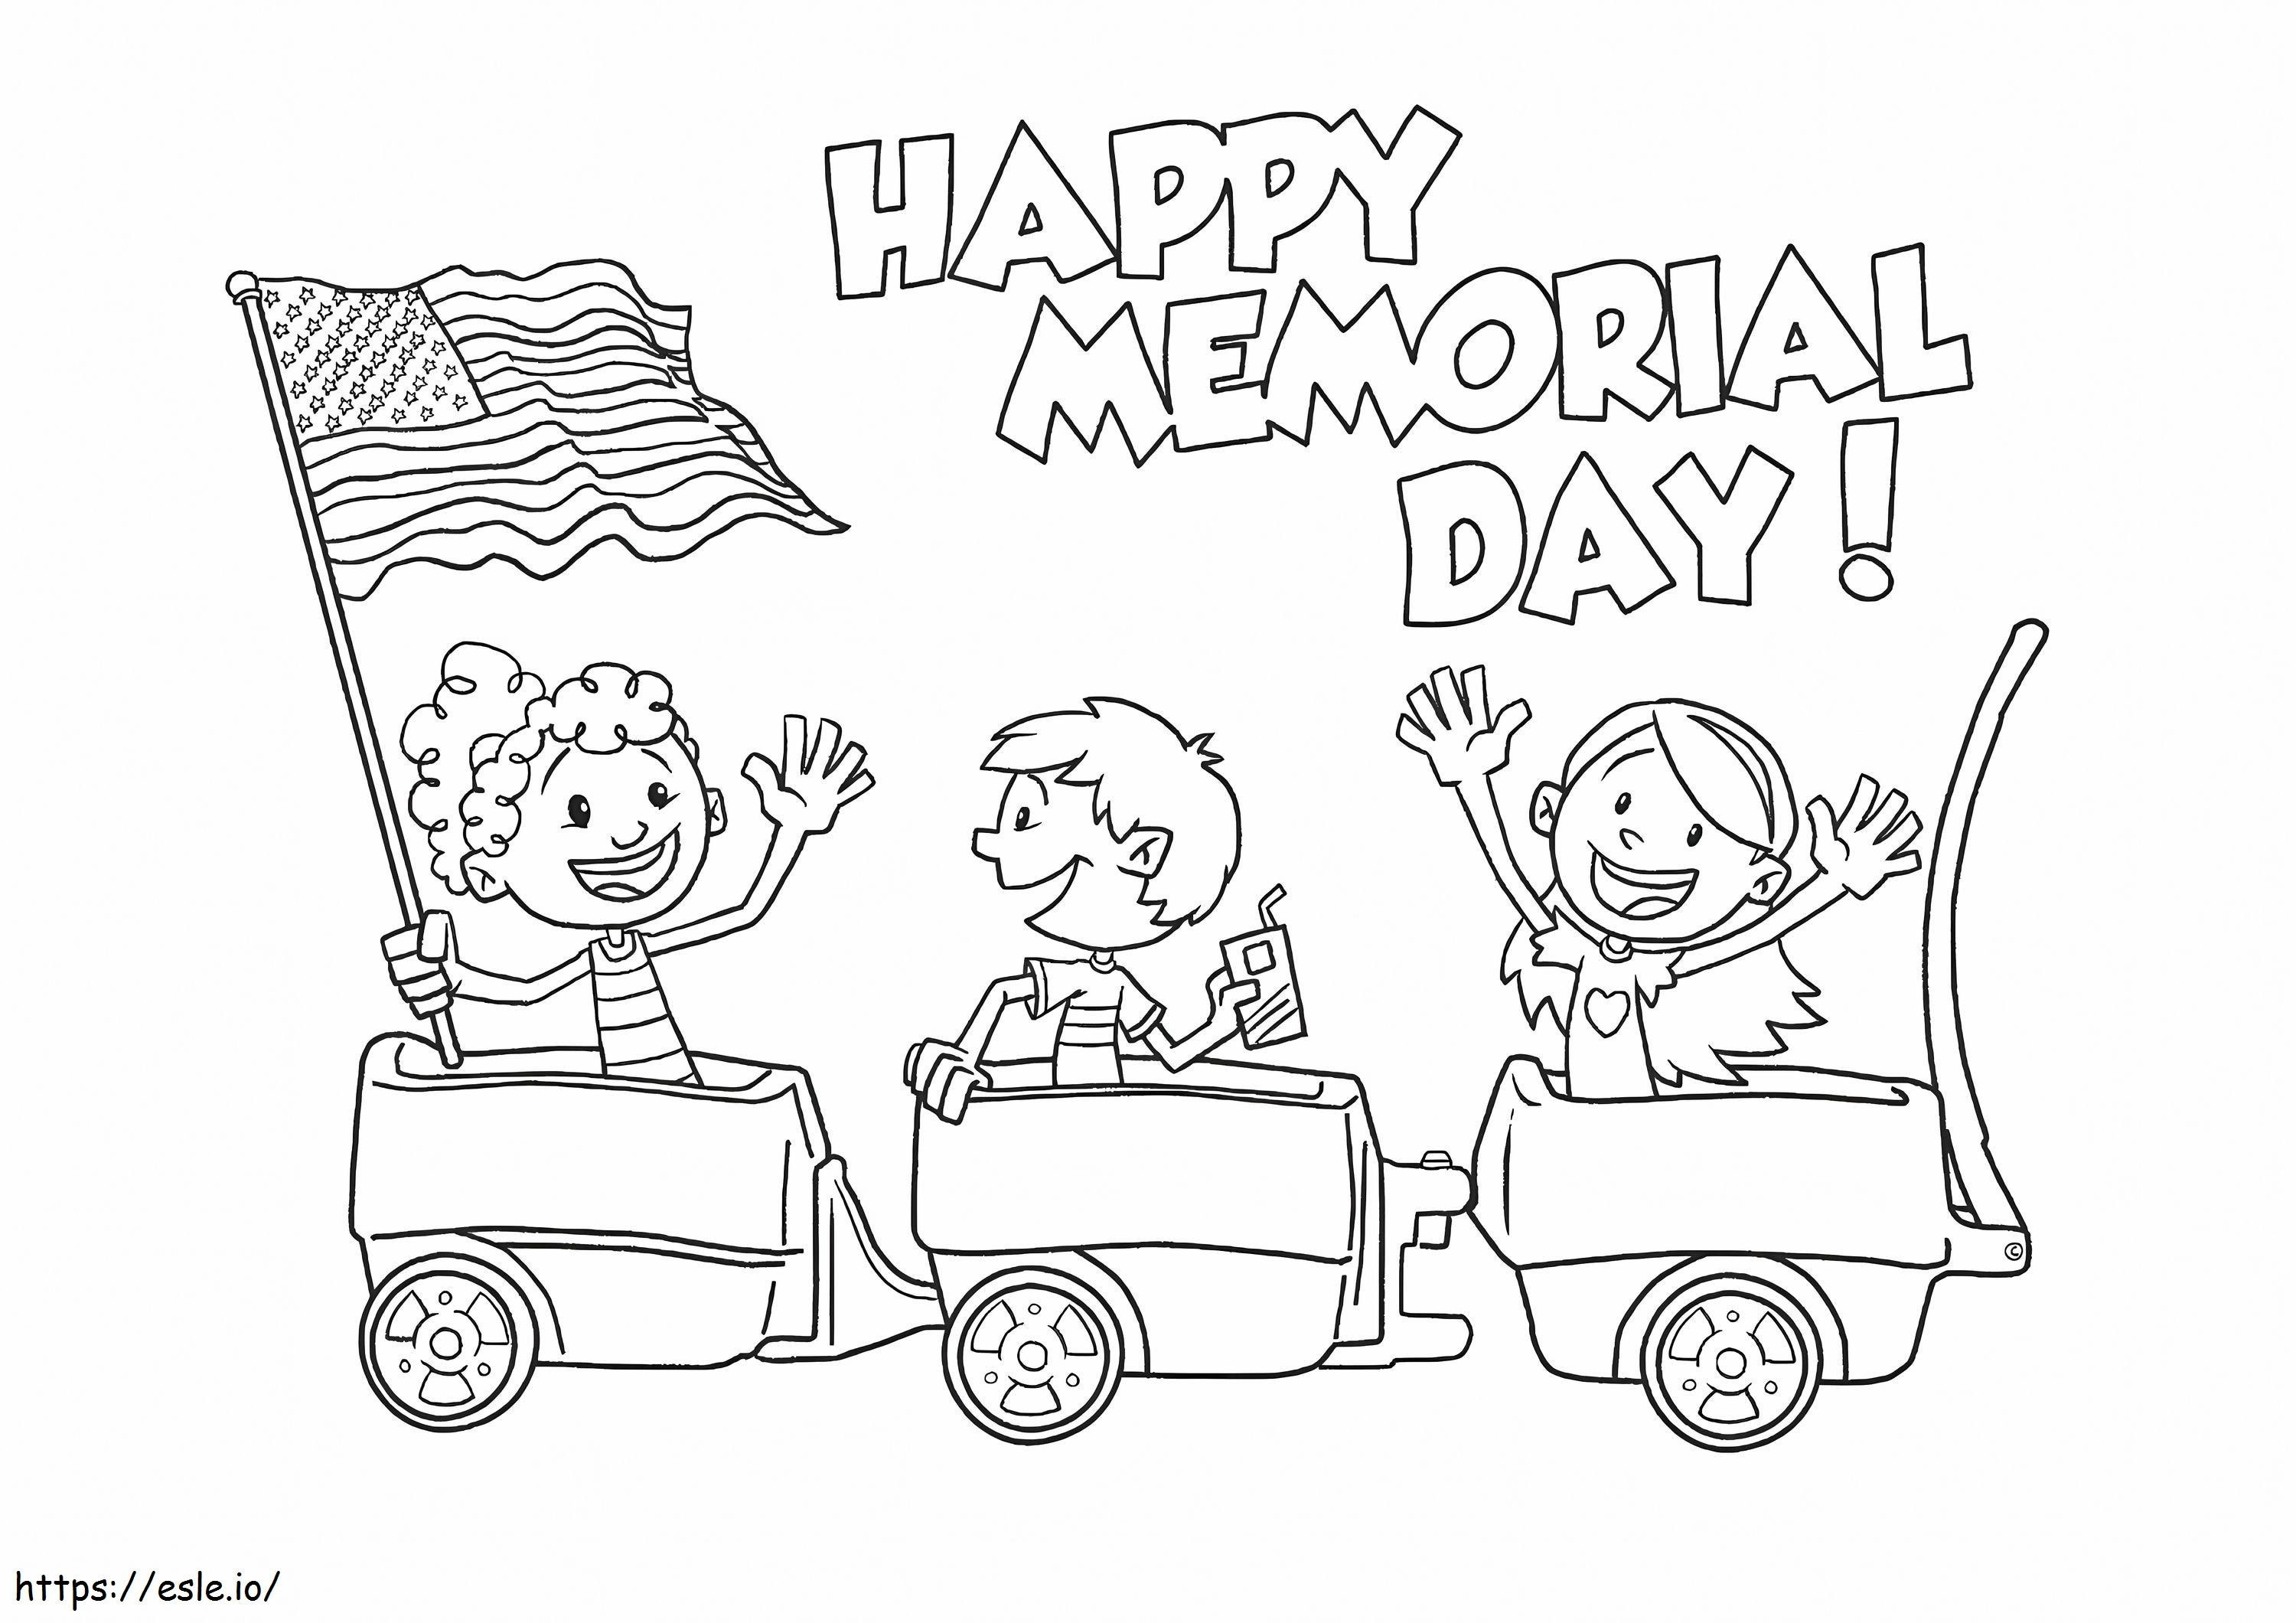 Step2 Blog Memorial Day Pdf coloring page